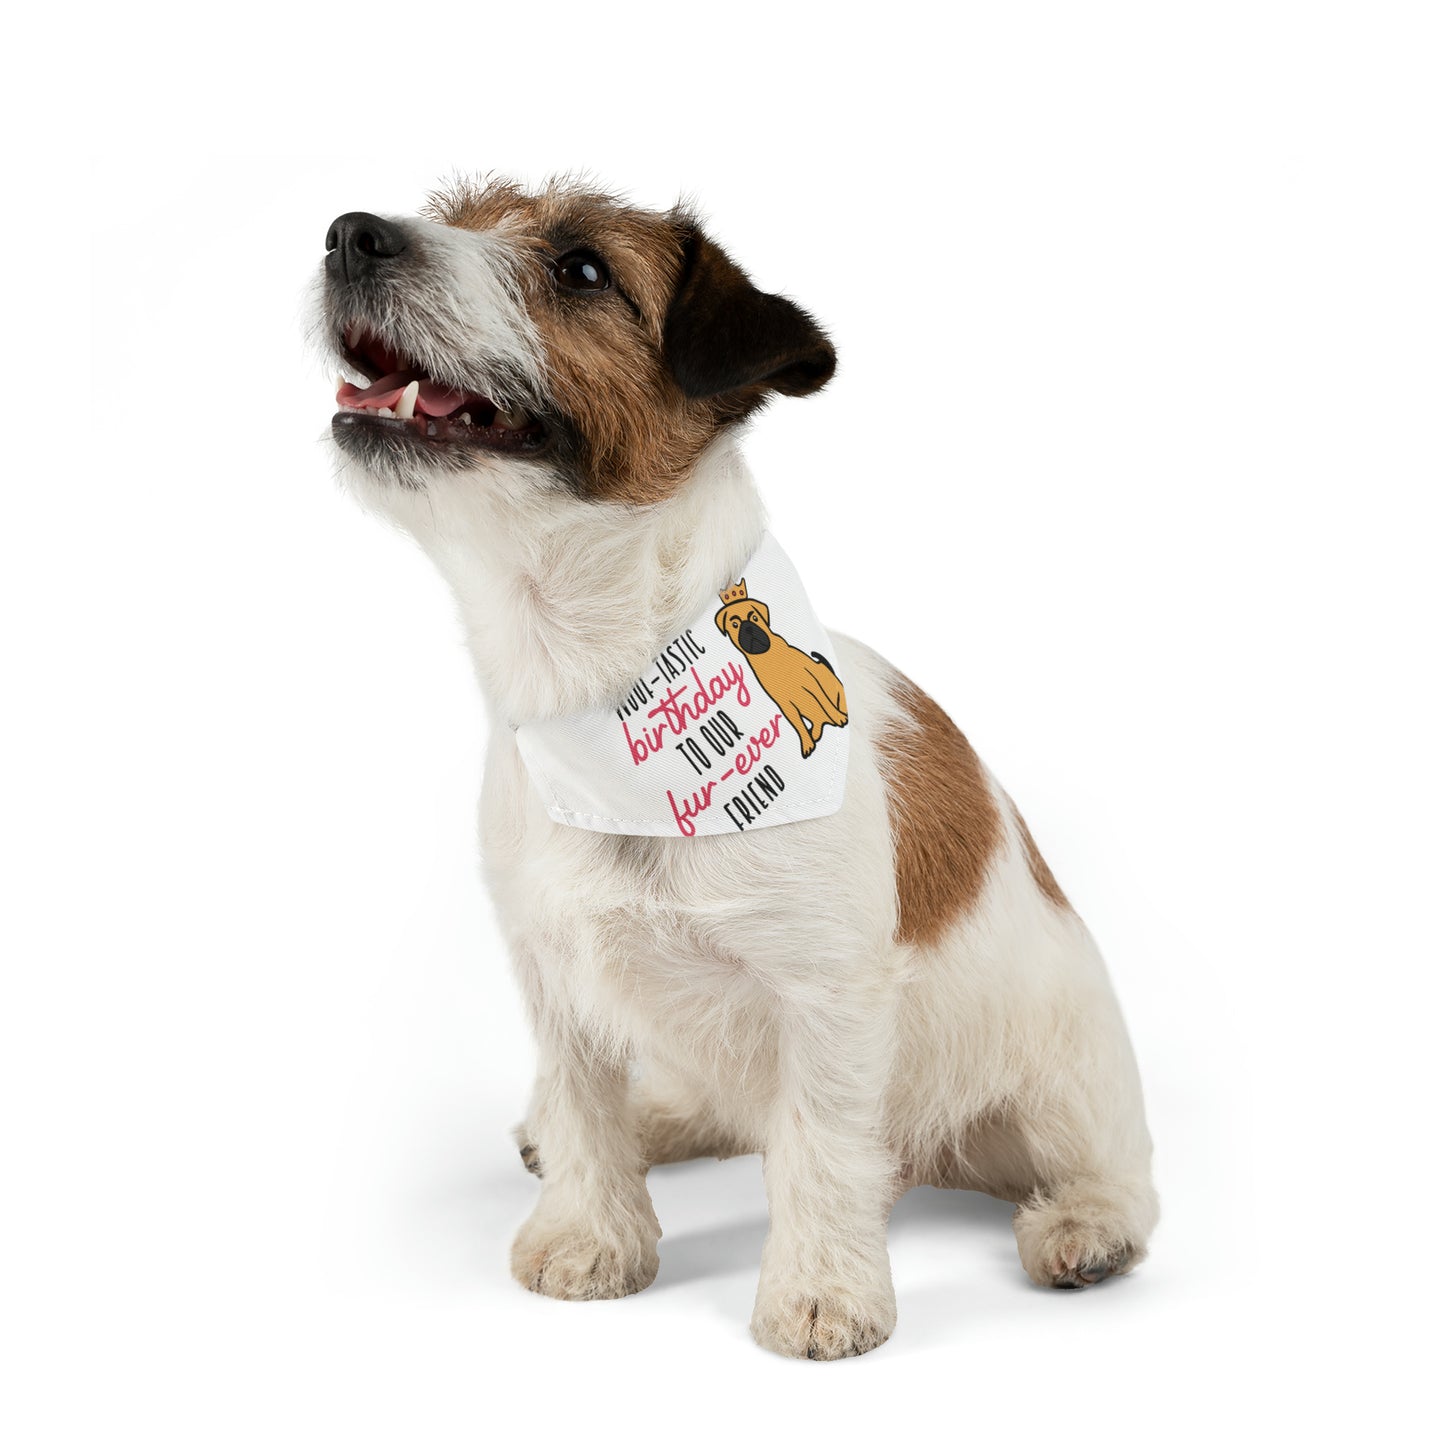 Woof-Tastic Birthday To Our Fur-Ever Friend, By Art Designs, Dog Lovers,  Dog Pet Bandana Collar